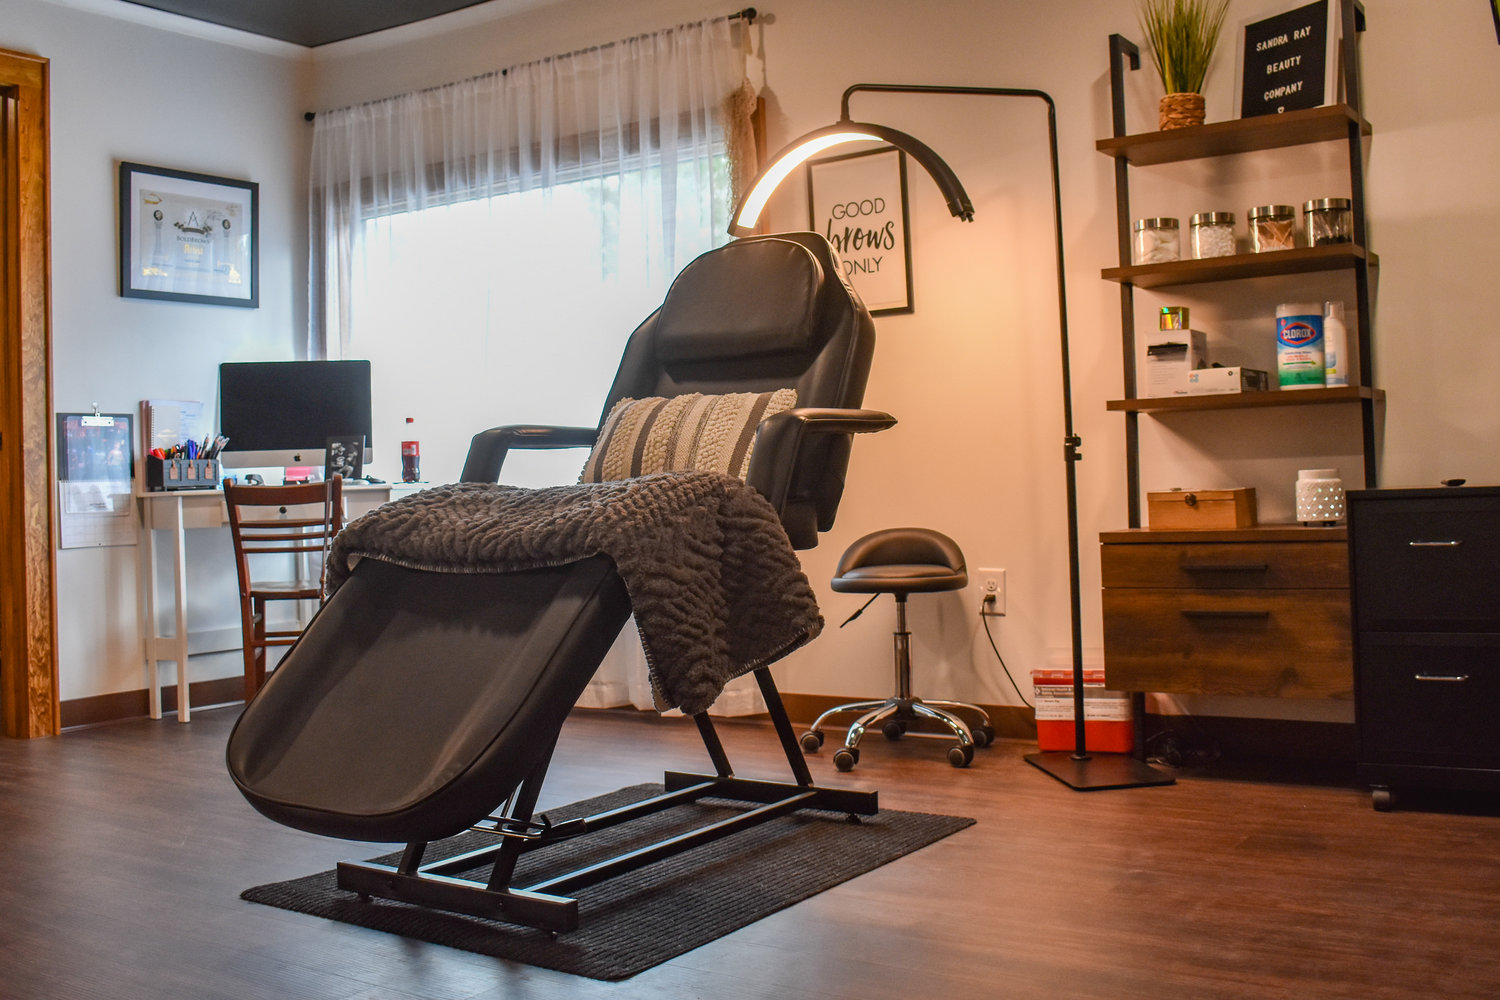 This area inside Sandra Ray Beauty Co. is where microblading services are performed. Owner Sandra Ray said she likes to evoke a welcoming, positive vibe throughout her space.